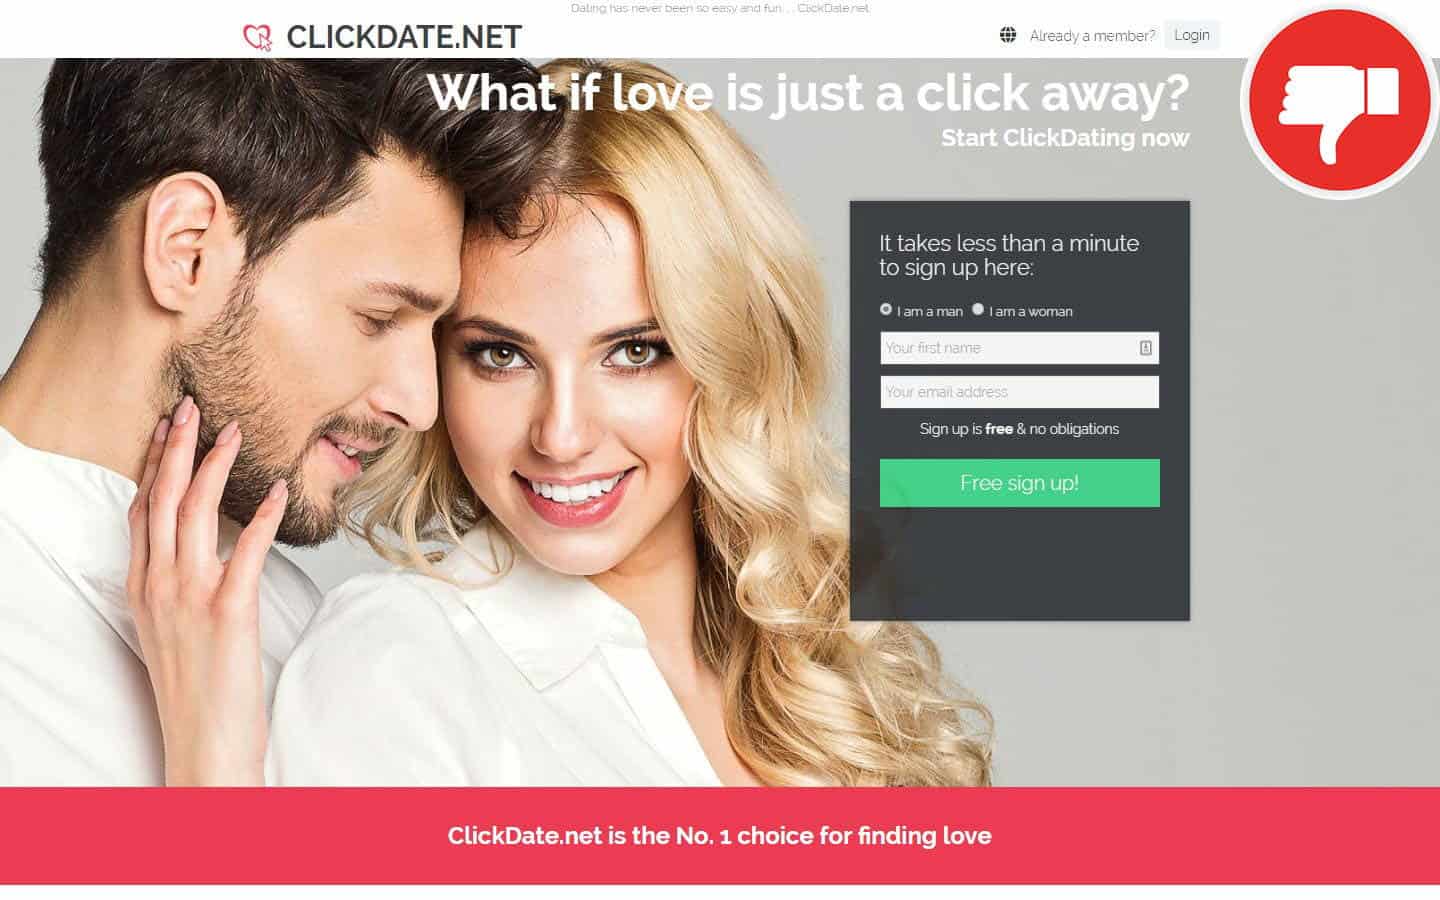 Review: clickdate.net Scam